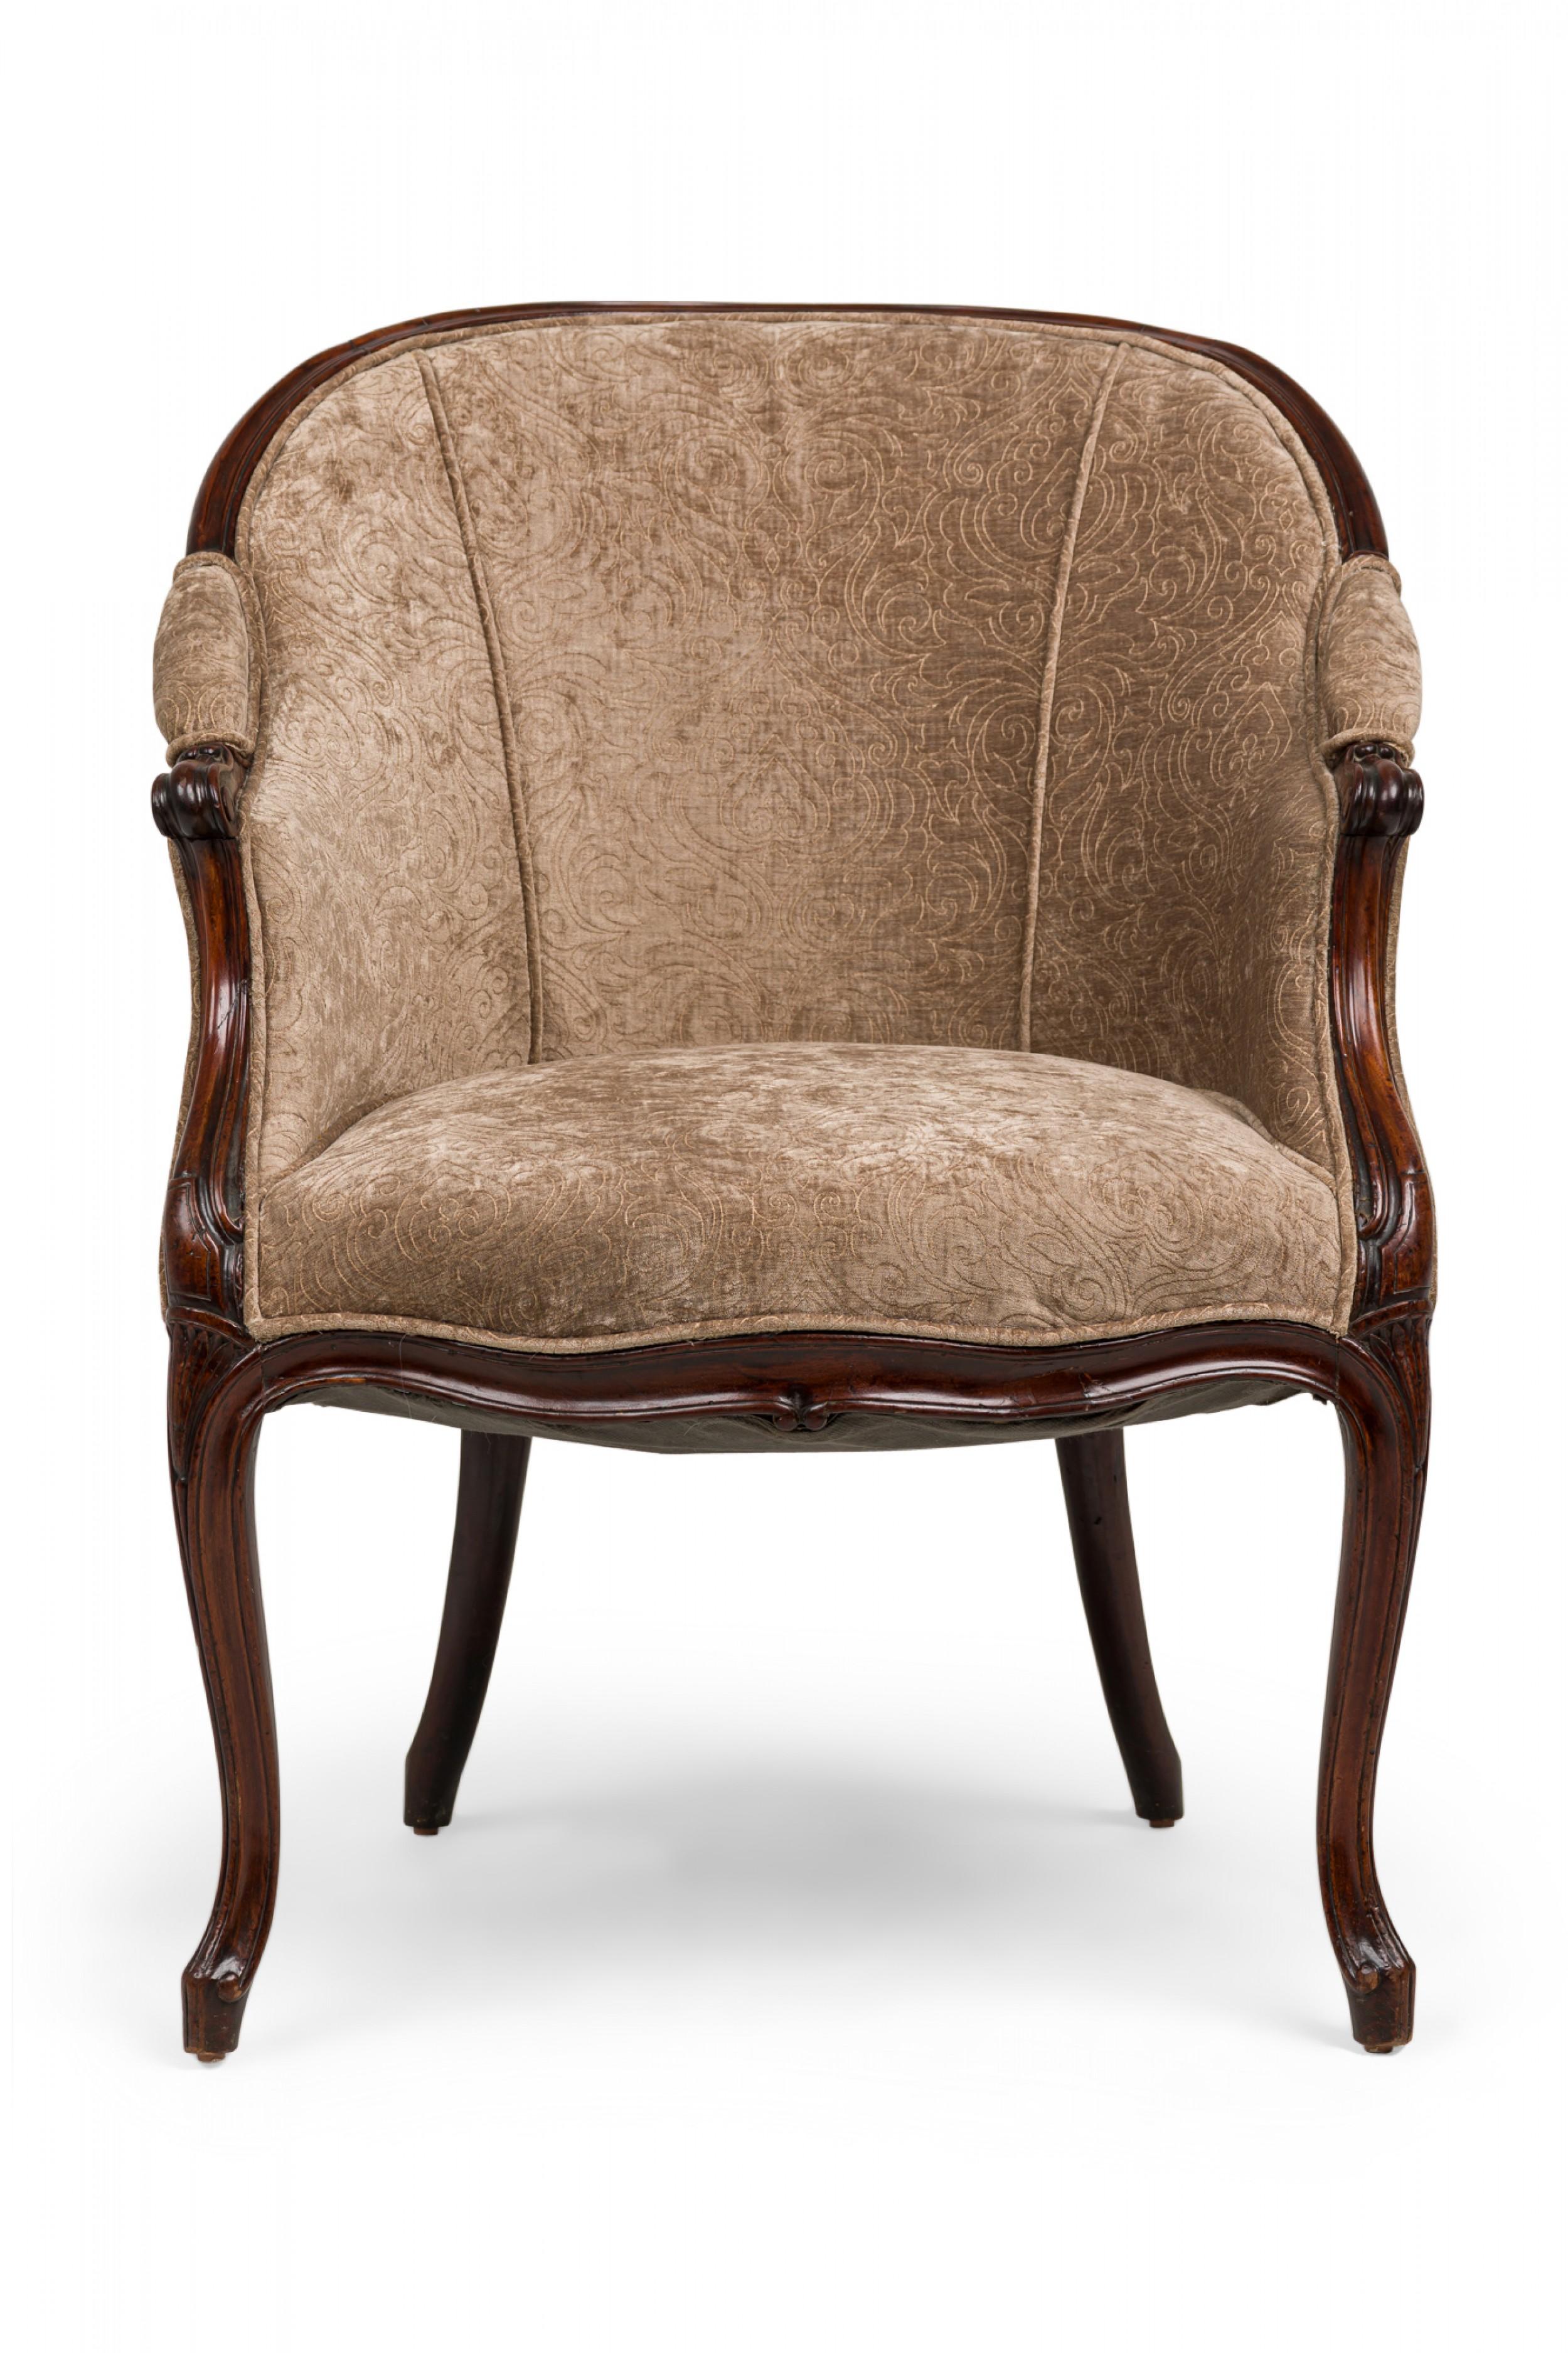 English George III upholstered tub chair with a carved mahogany frame, rounded padded back, sides and seat upholstered in taupe/beige velvet fabric with a subtle embroidered floral pattern, resting on molded tapering, curved legs.